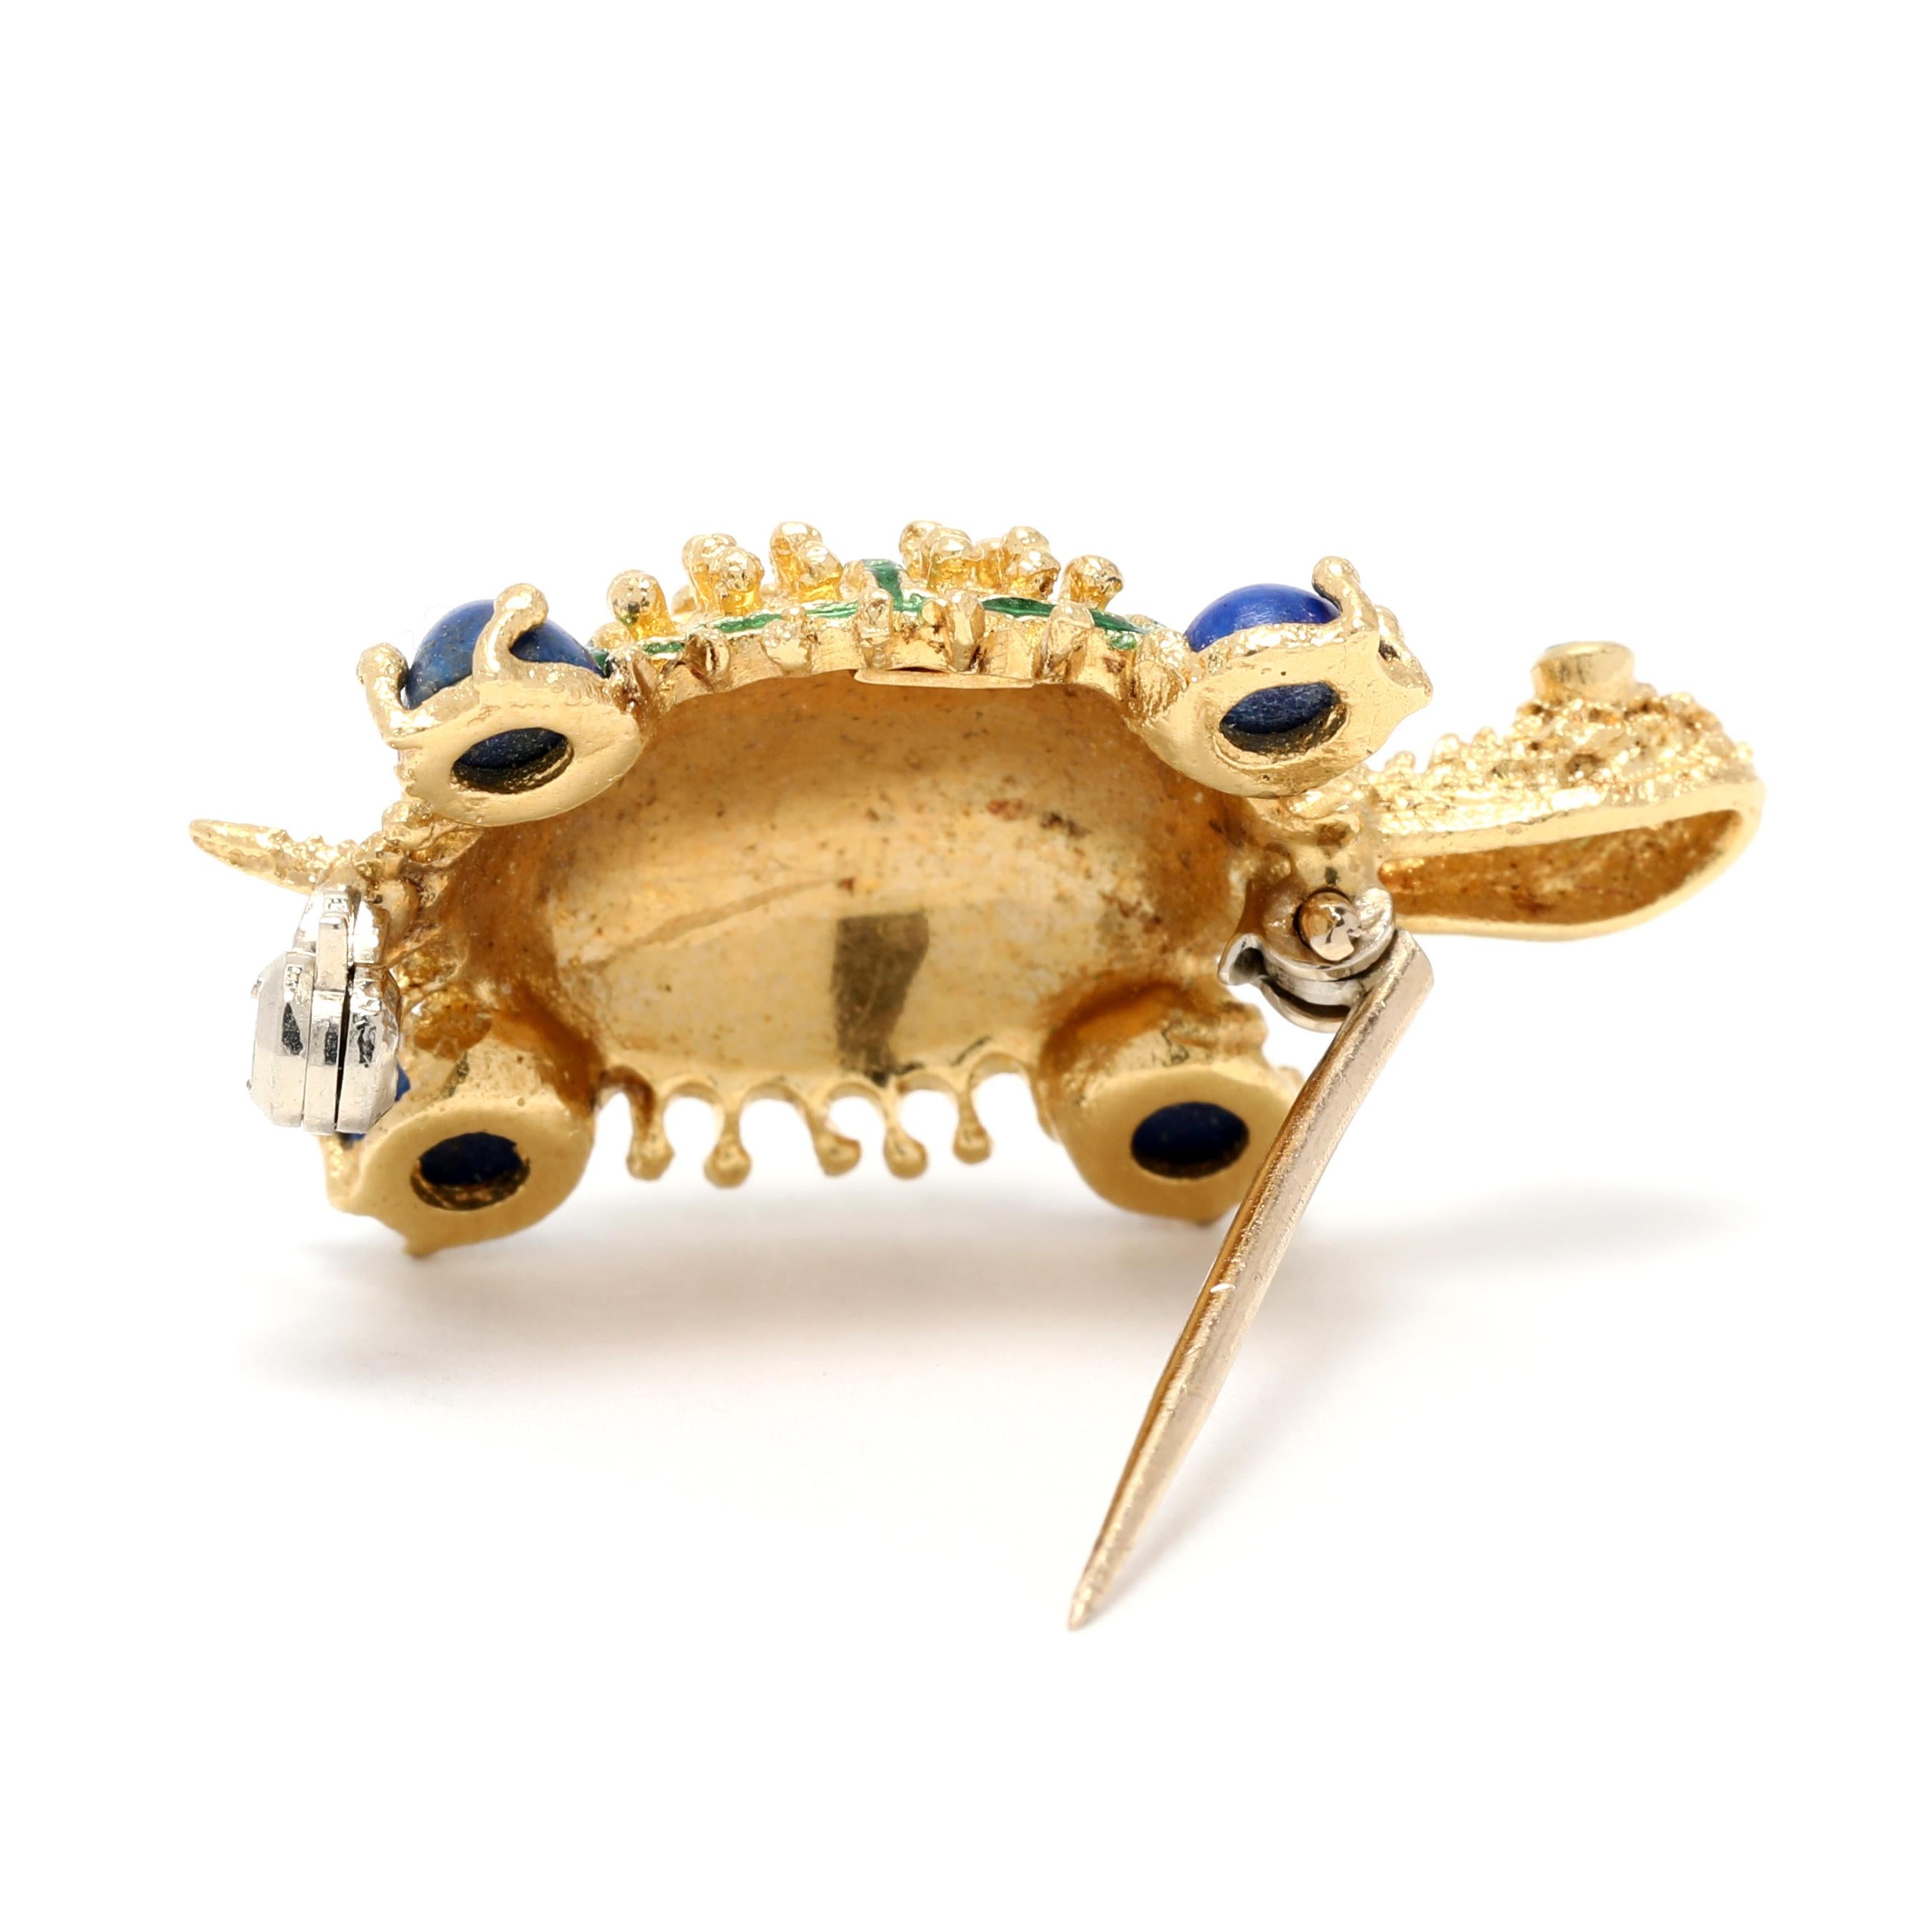 This exquisite 18K Yellow Gold Lapis Turtle Brooch created by Hammerman Brothers is the perfect accessory for any special occasion. Crafted with a bold, bright emerald lapis stone, this small turtle brooch features a detailed enamel shell and